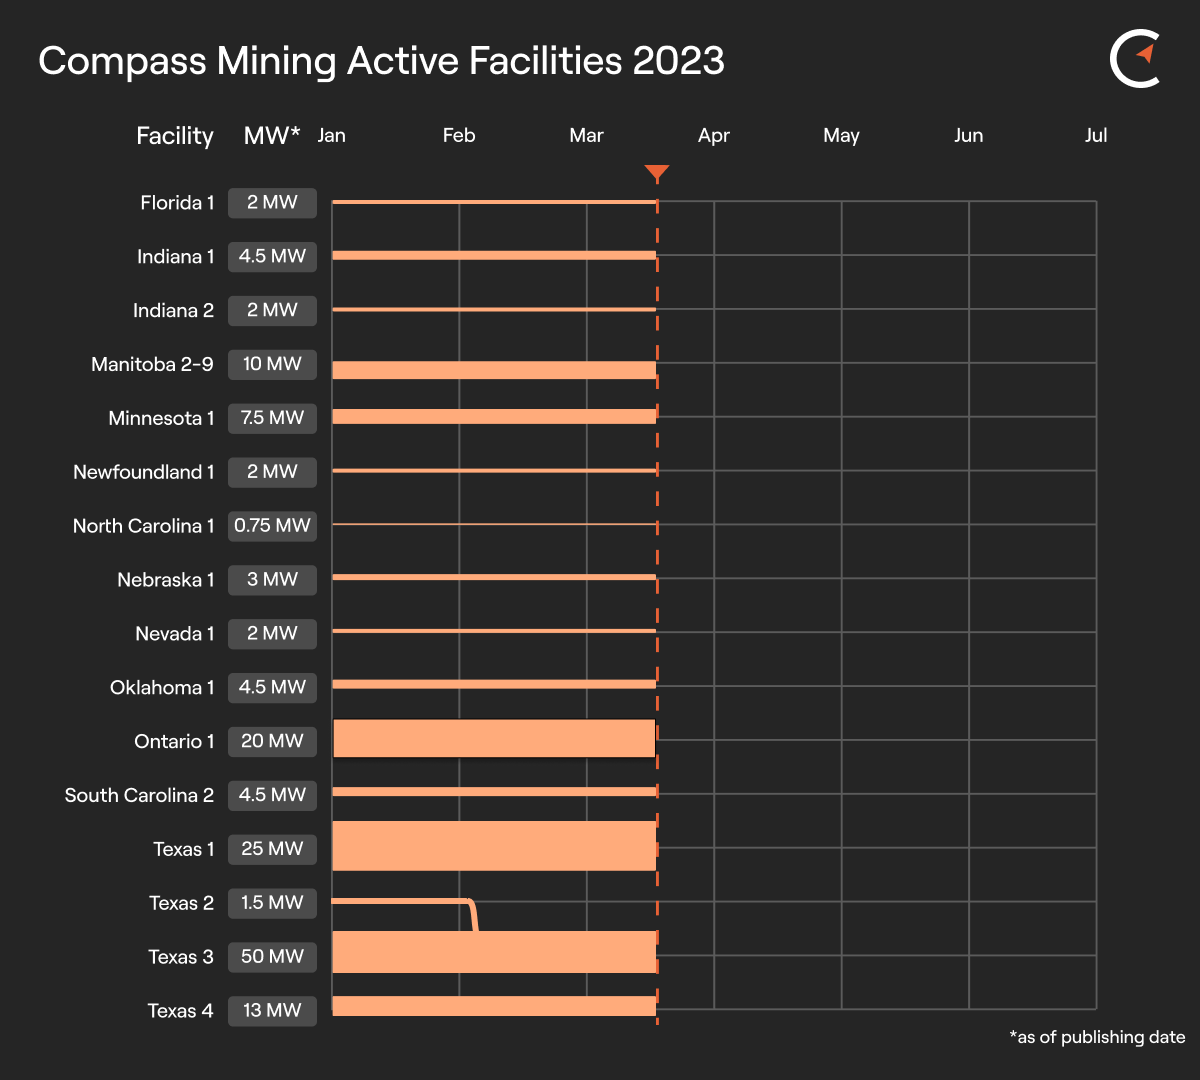 Compass Mining Facility Update: March 21